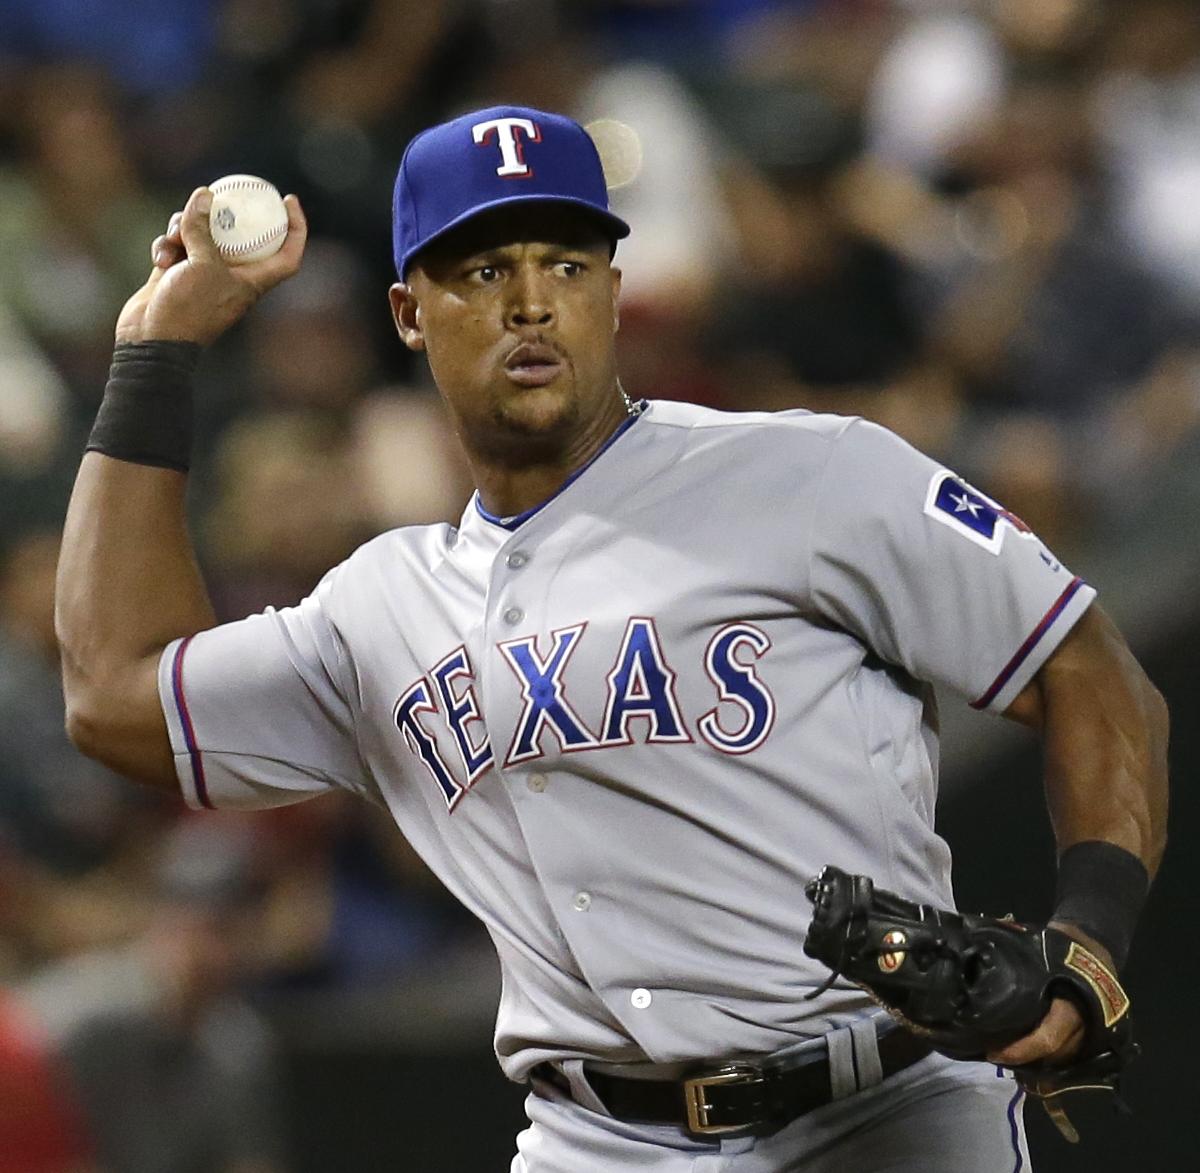 Bigger contributor to Adrian Beltre's legacy -- statistics or